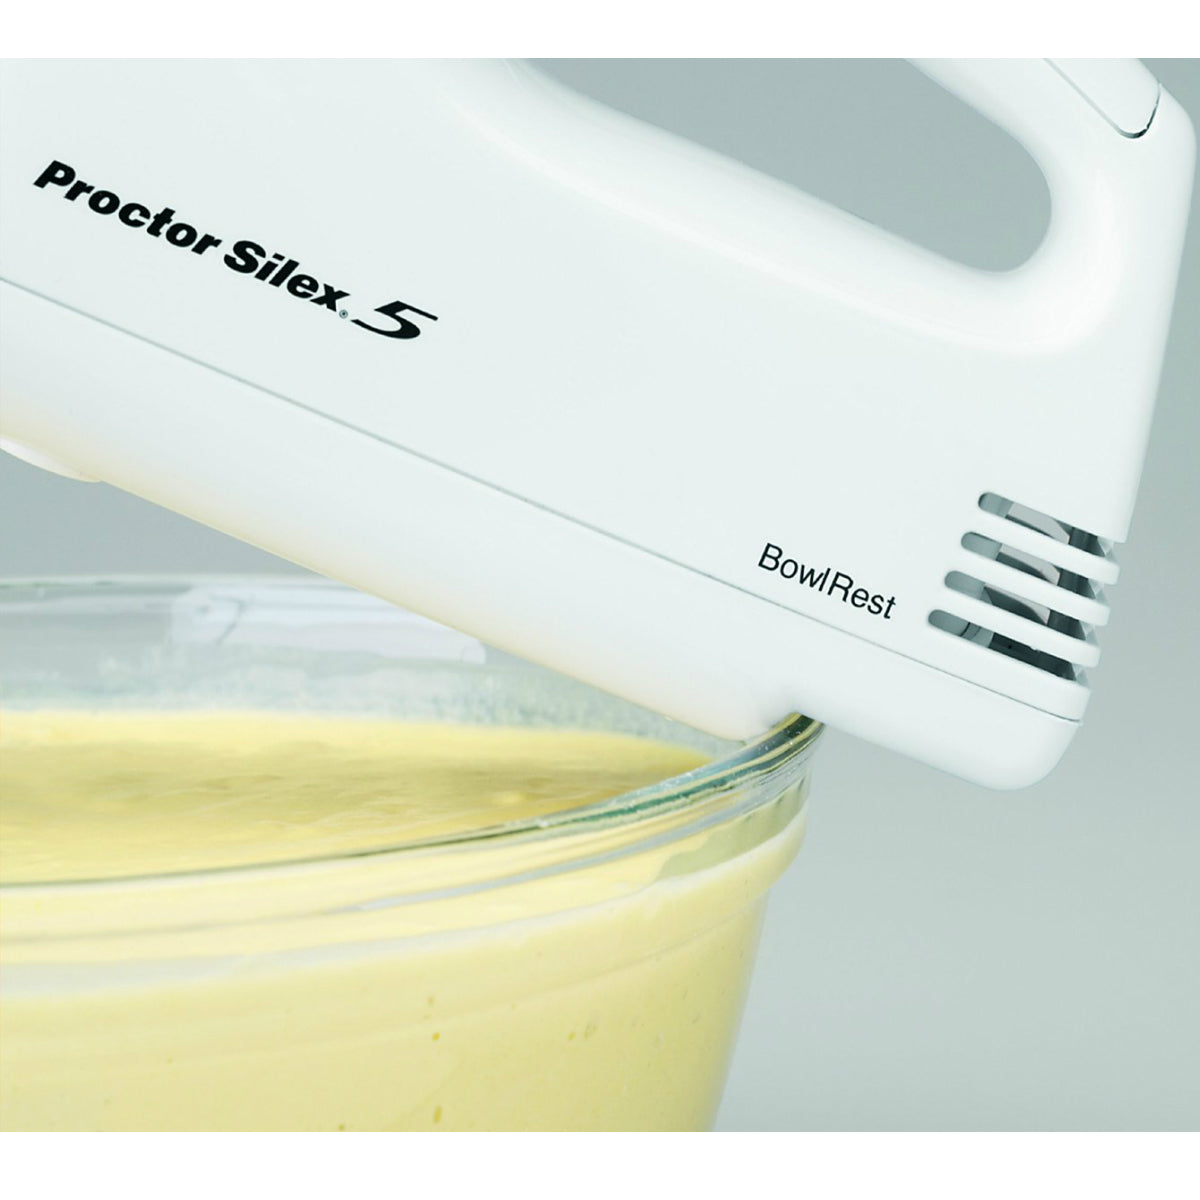 Proctor Silex 62515R Easy Mix 5-Speed Hand Mixer with Bowl Rest, 125 W